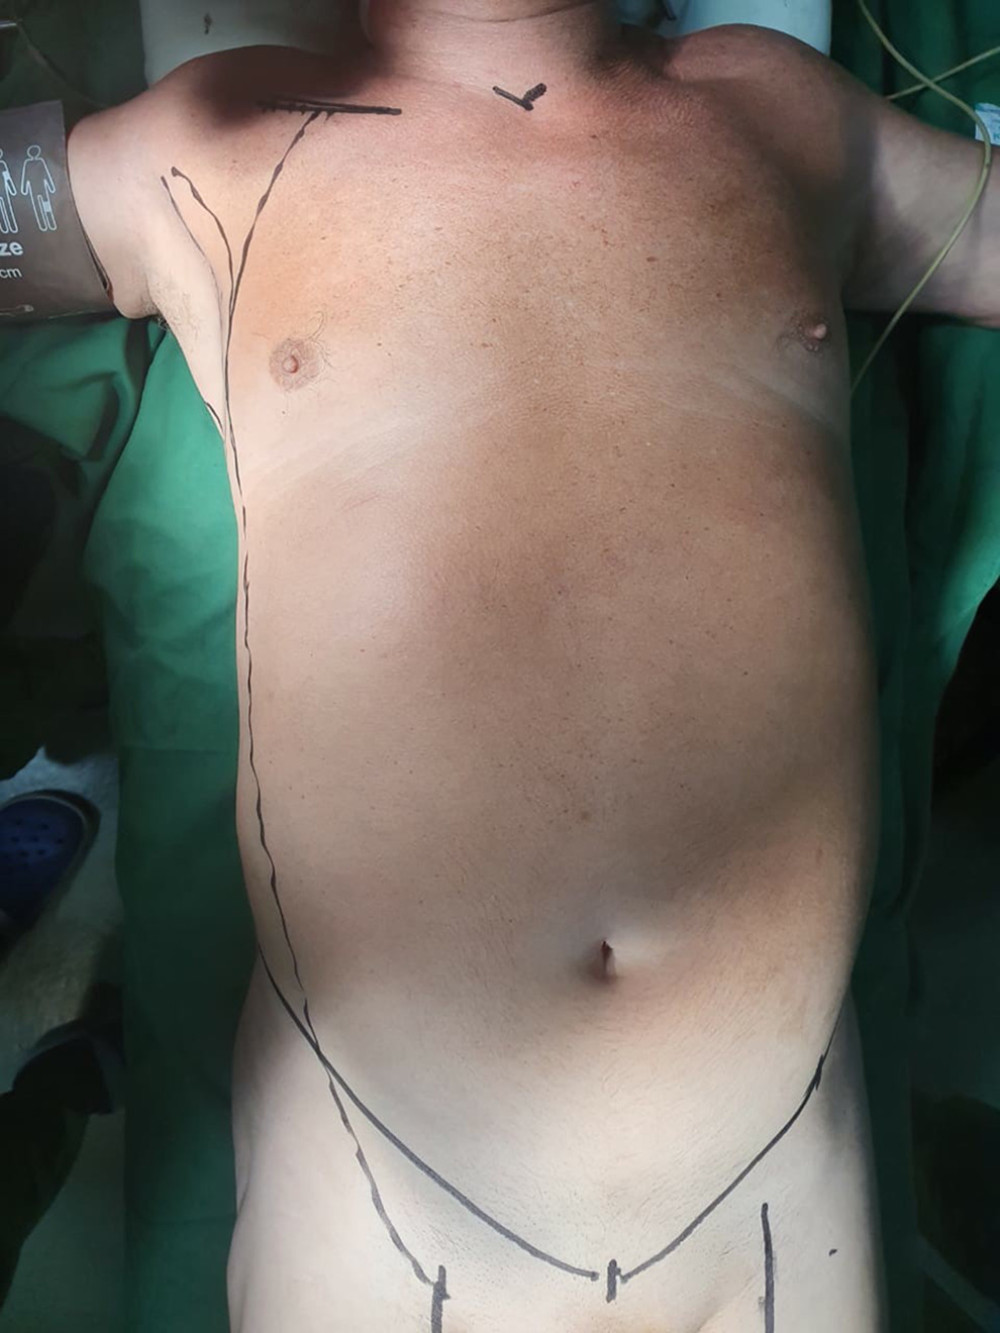 Site marking: one finger below right mid-clavicle for proximal anastomosis, lateral tunneling along midaxillary line, and inguinal for distal anastomosis.